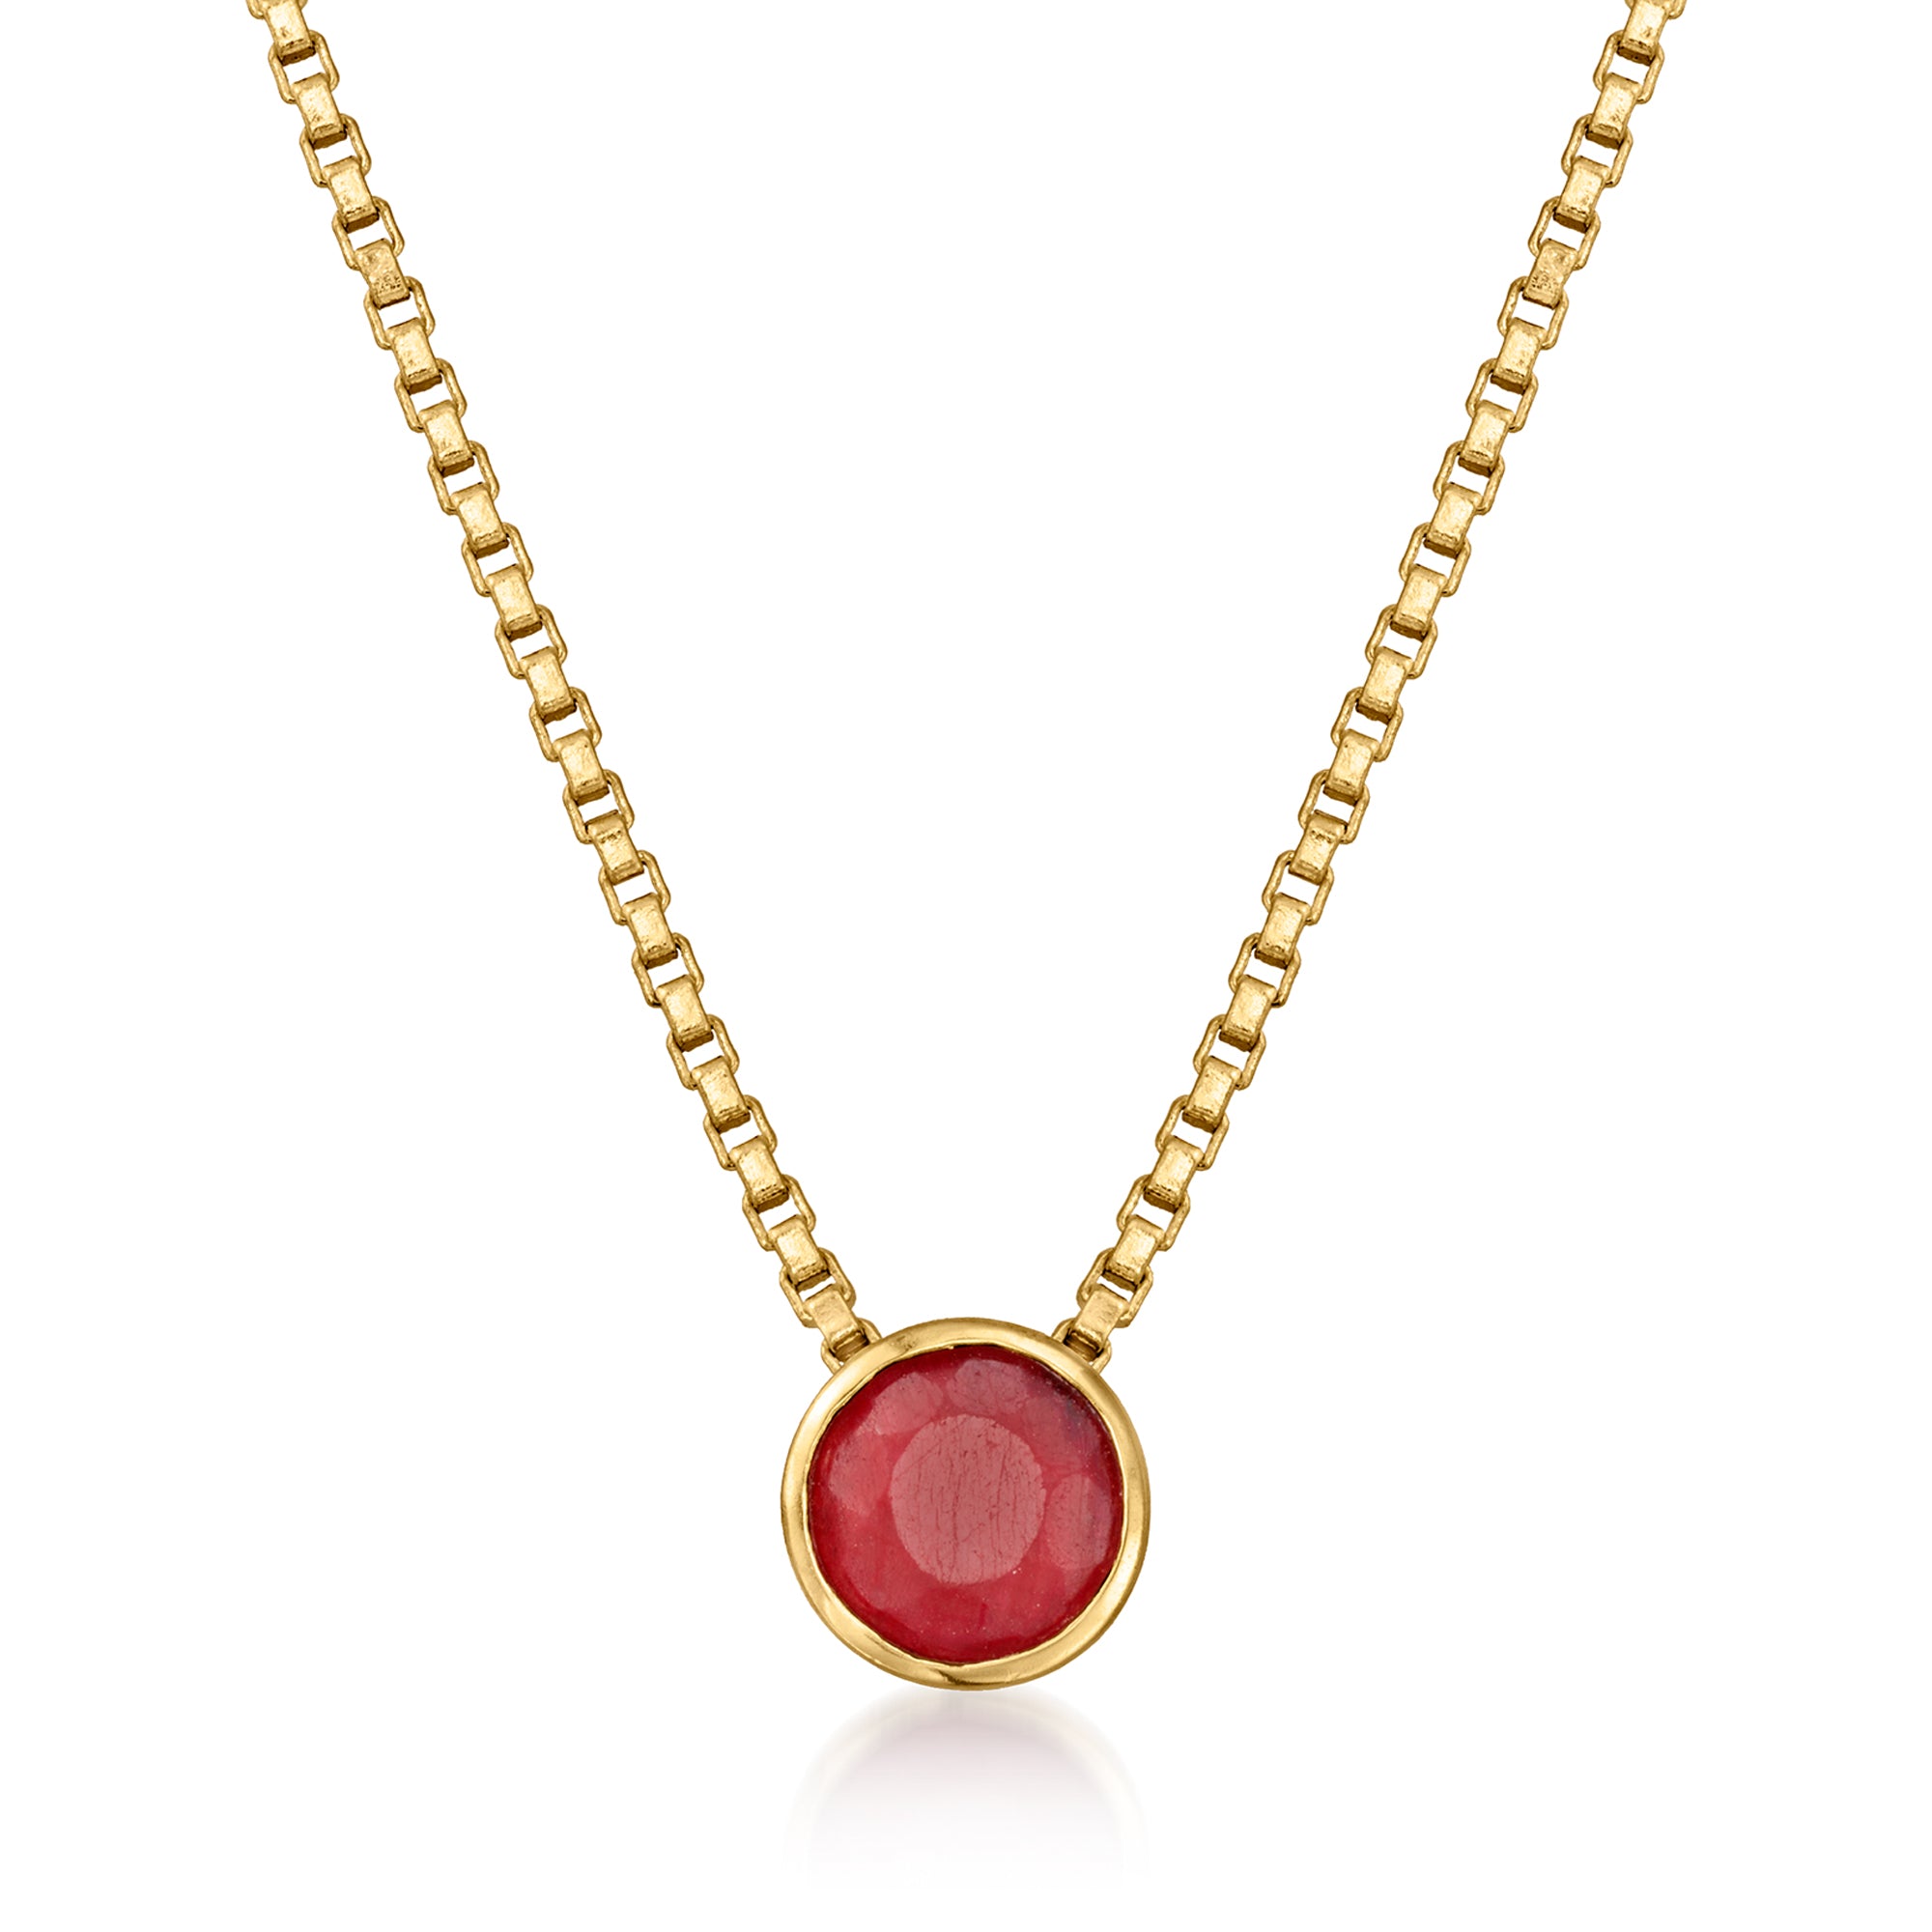 Ross-simons Ruby Necklace In 18kt Gold Over Sterling In Metallic